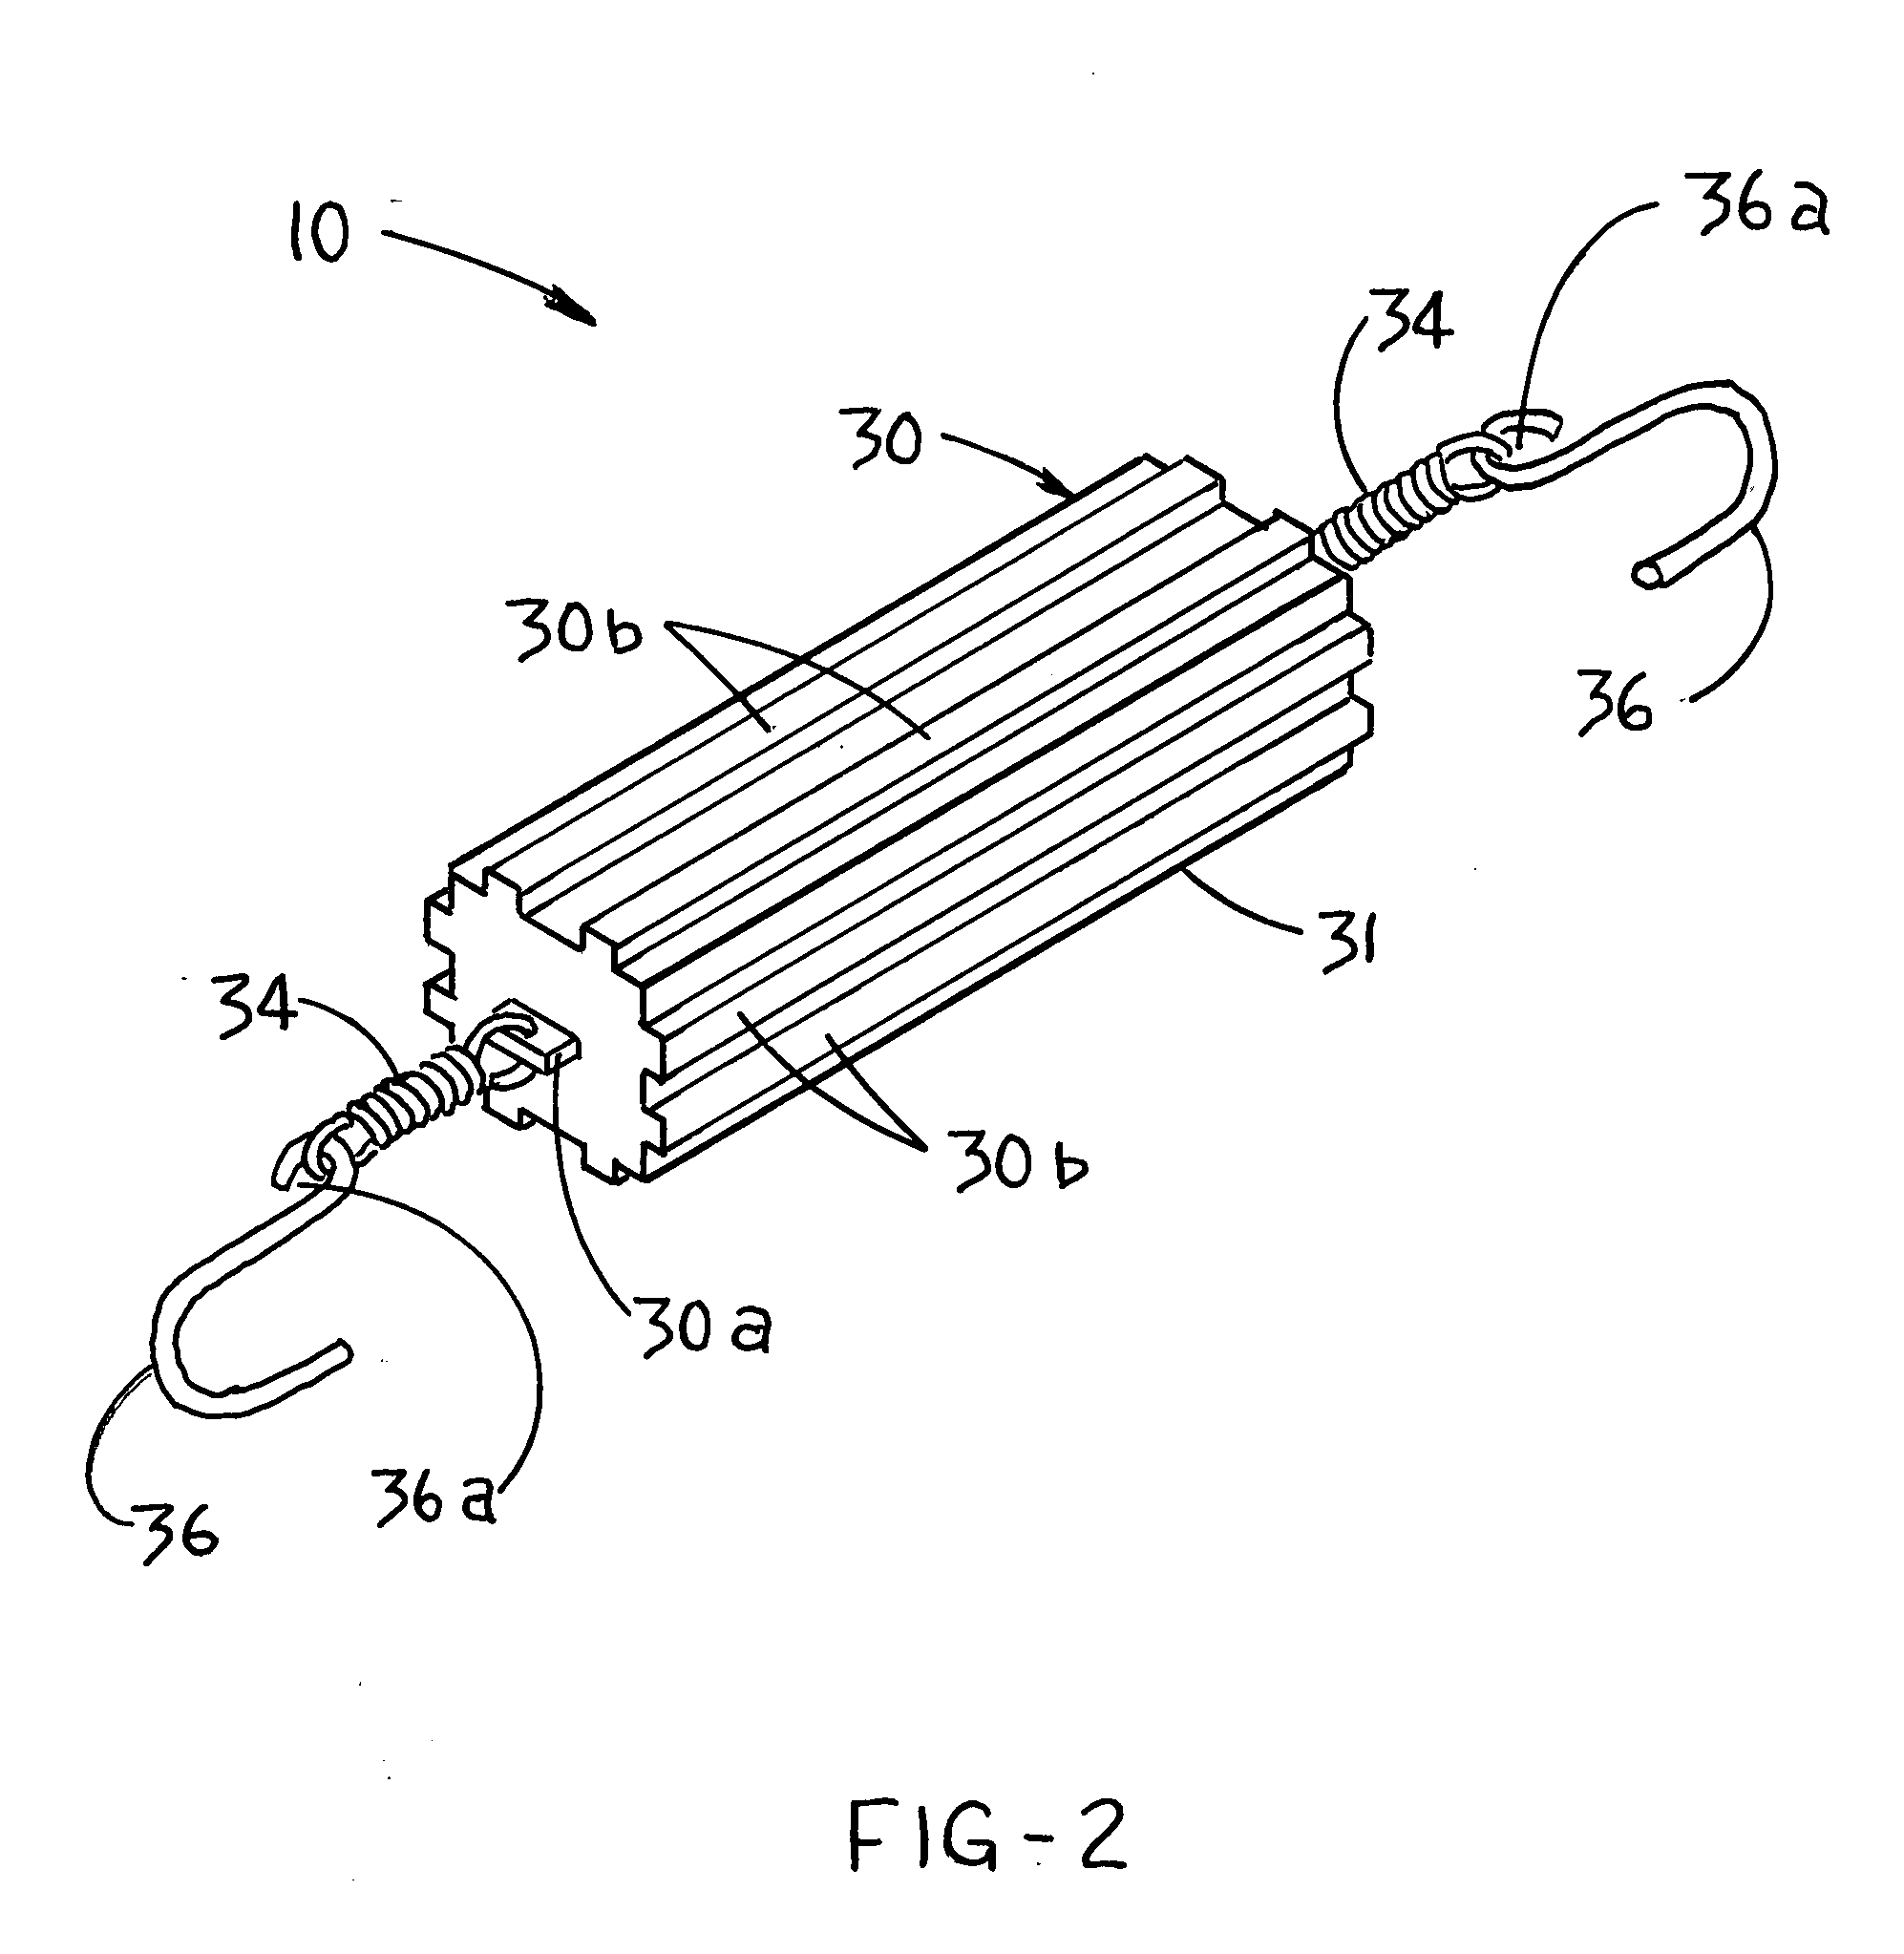 Apparatus and method for releasably holding fabric in place on an ironing board or the like